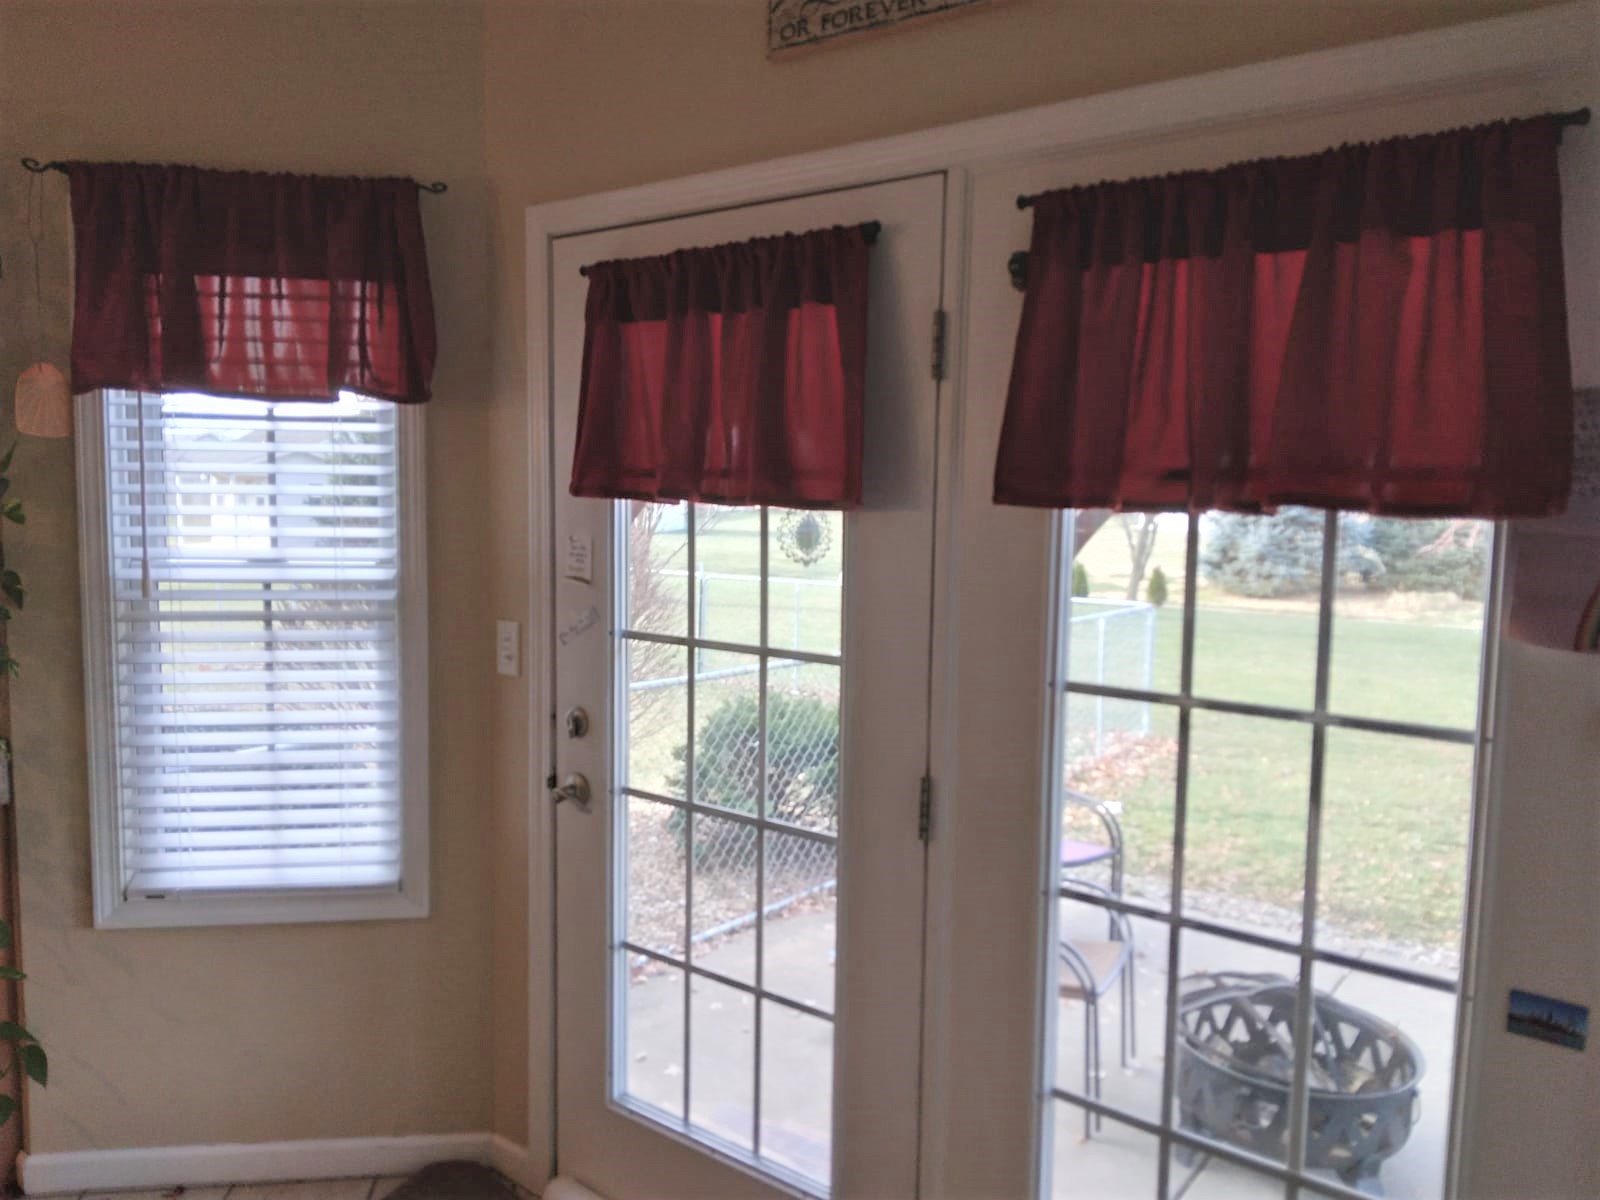 White blinds can help brighten up any room. They are one of the most popular window coverings in the Springfield Illinois area.  BudgetBlinds  Blinds  WindowCoverings  SpringfieldIllinois  Springfield